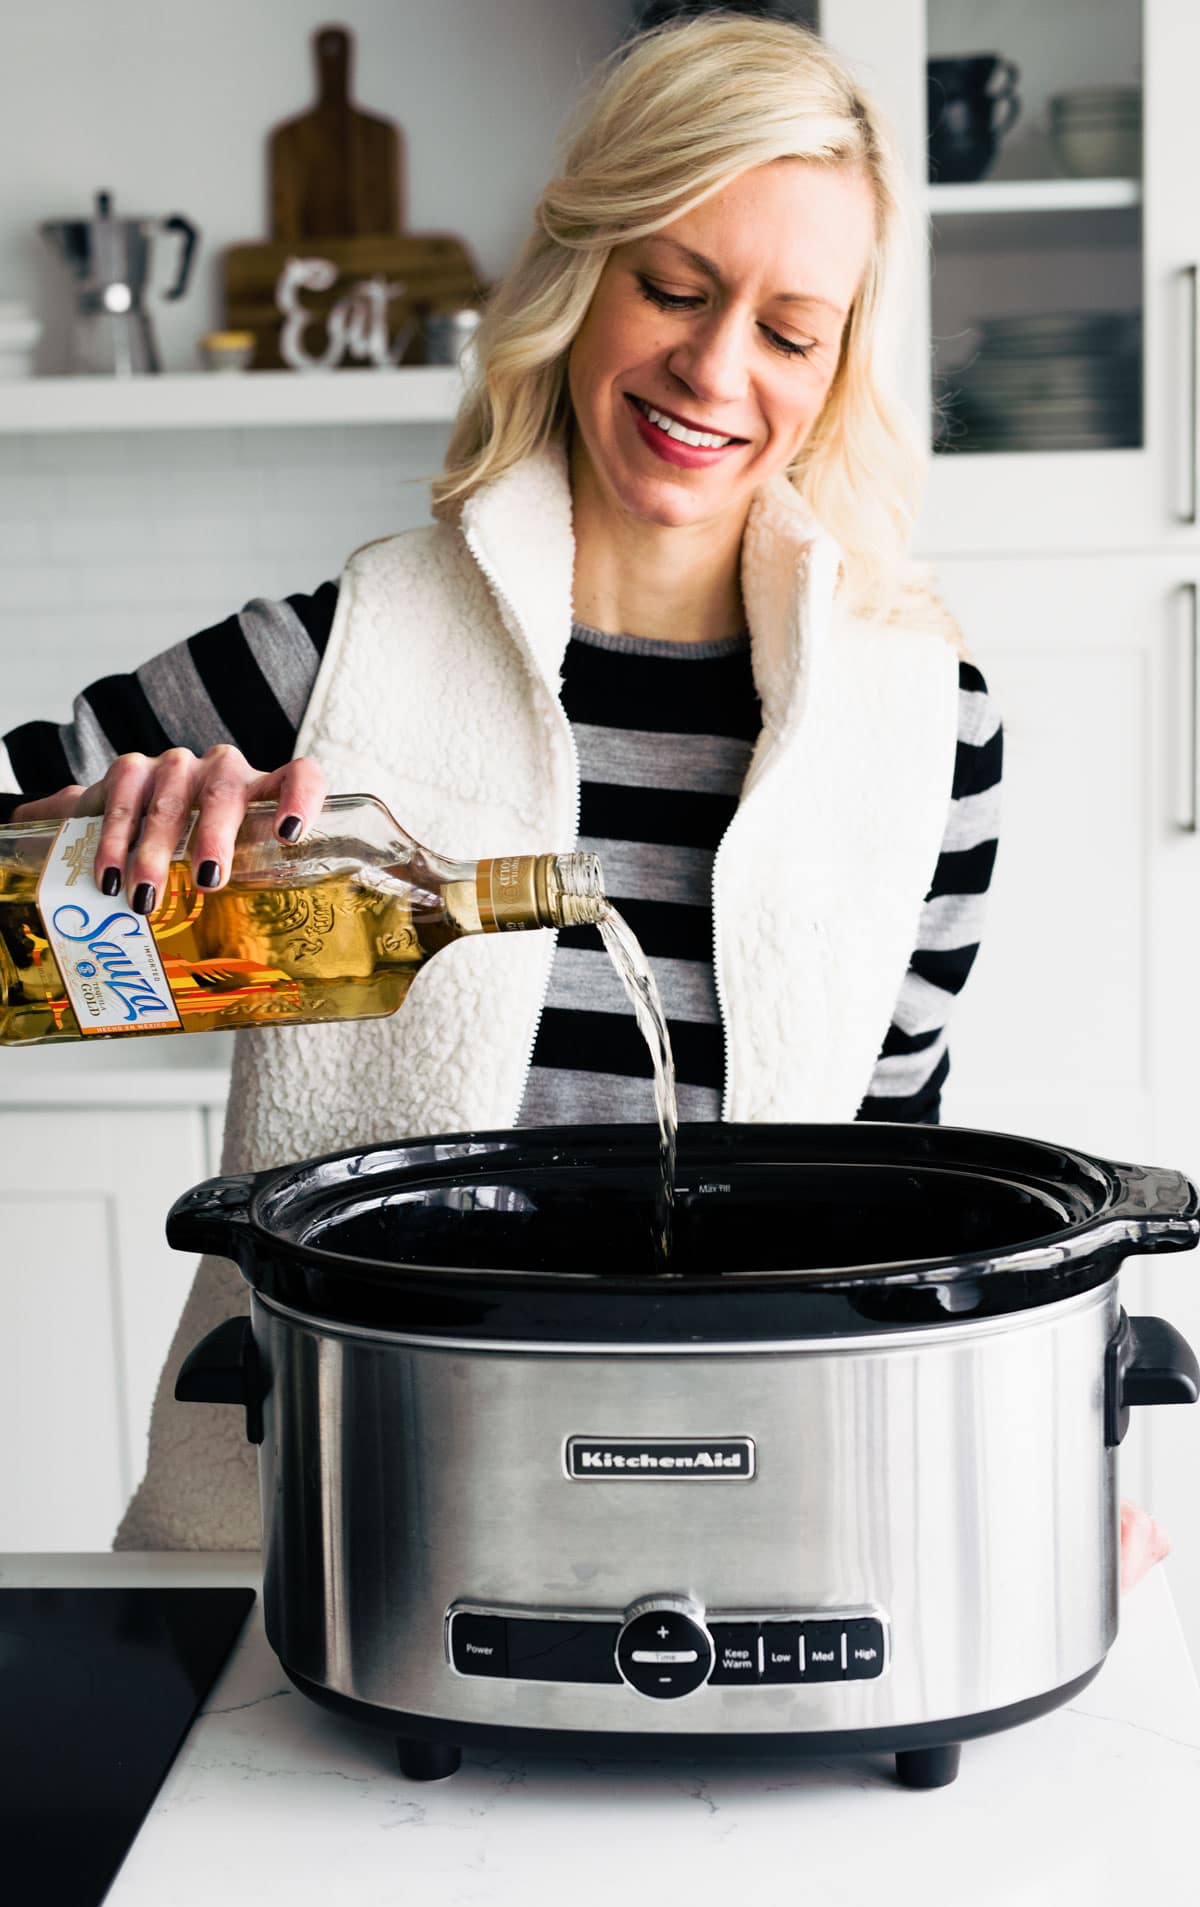 A woman smiling as she pours liqueur into a slow cooker in a white kitchen.